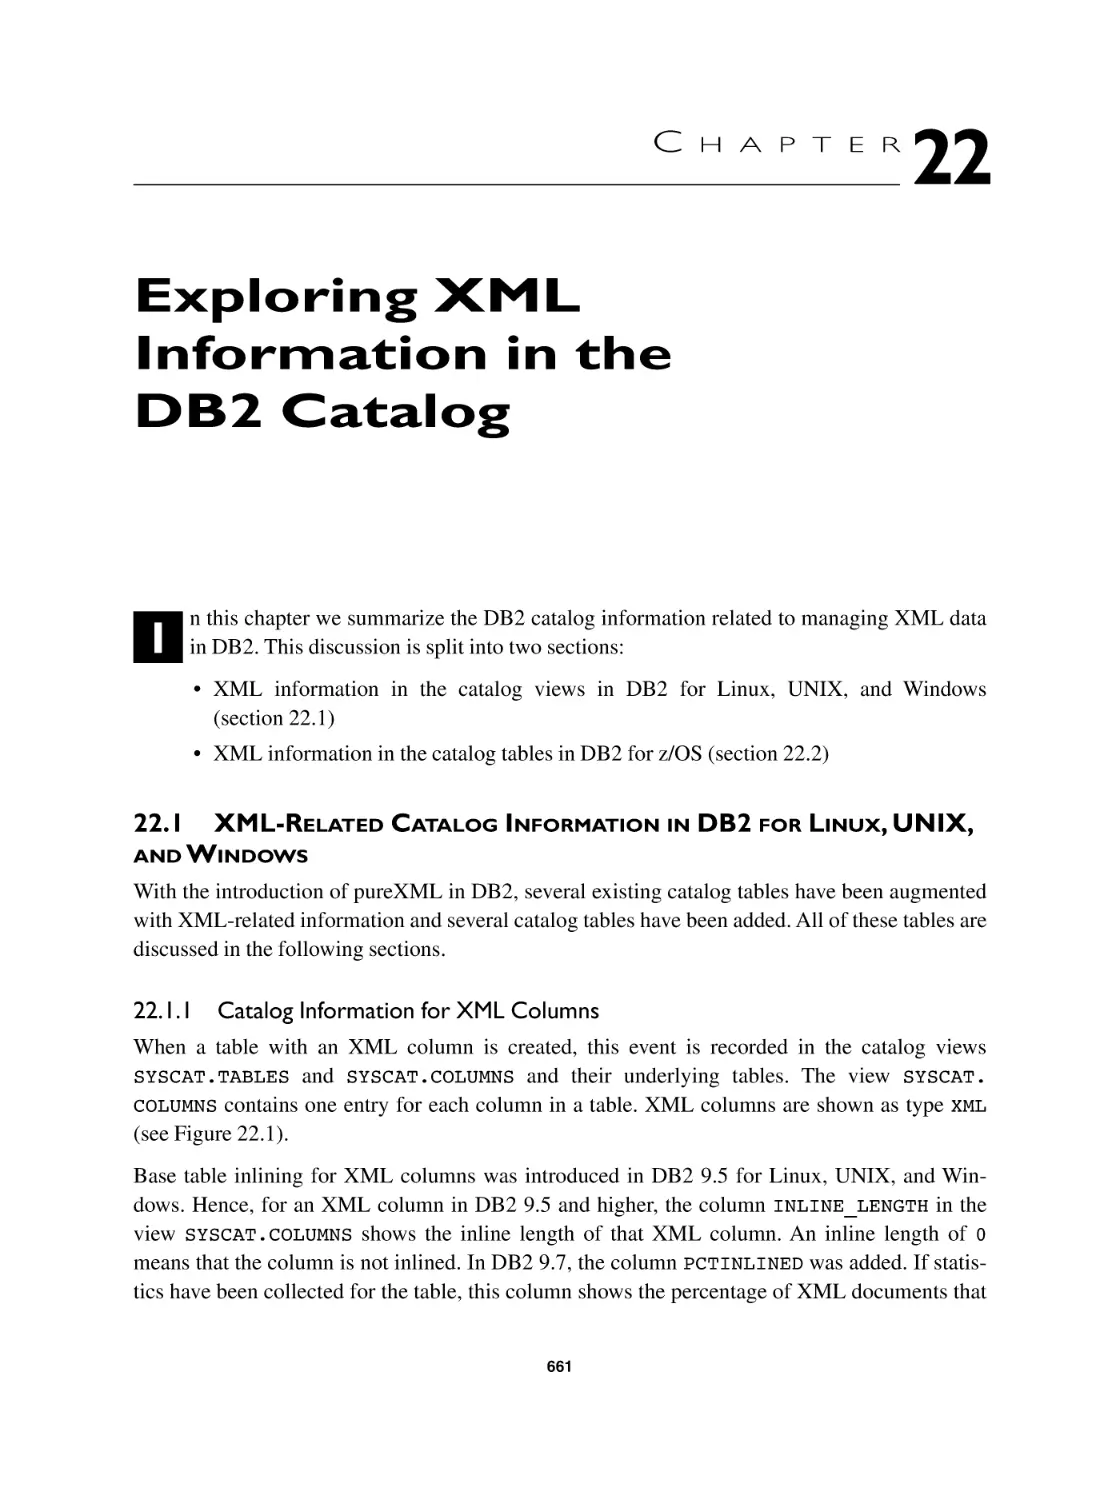 Chapter 22 Exploring XML Information in the DB2 Catalog
22.1 XML-Related Catalog Information in DB2 for Linux, UNIX, and Windows
22.1.1 Catalog Information for XML Columns